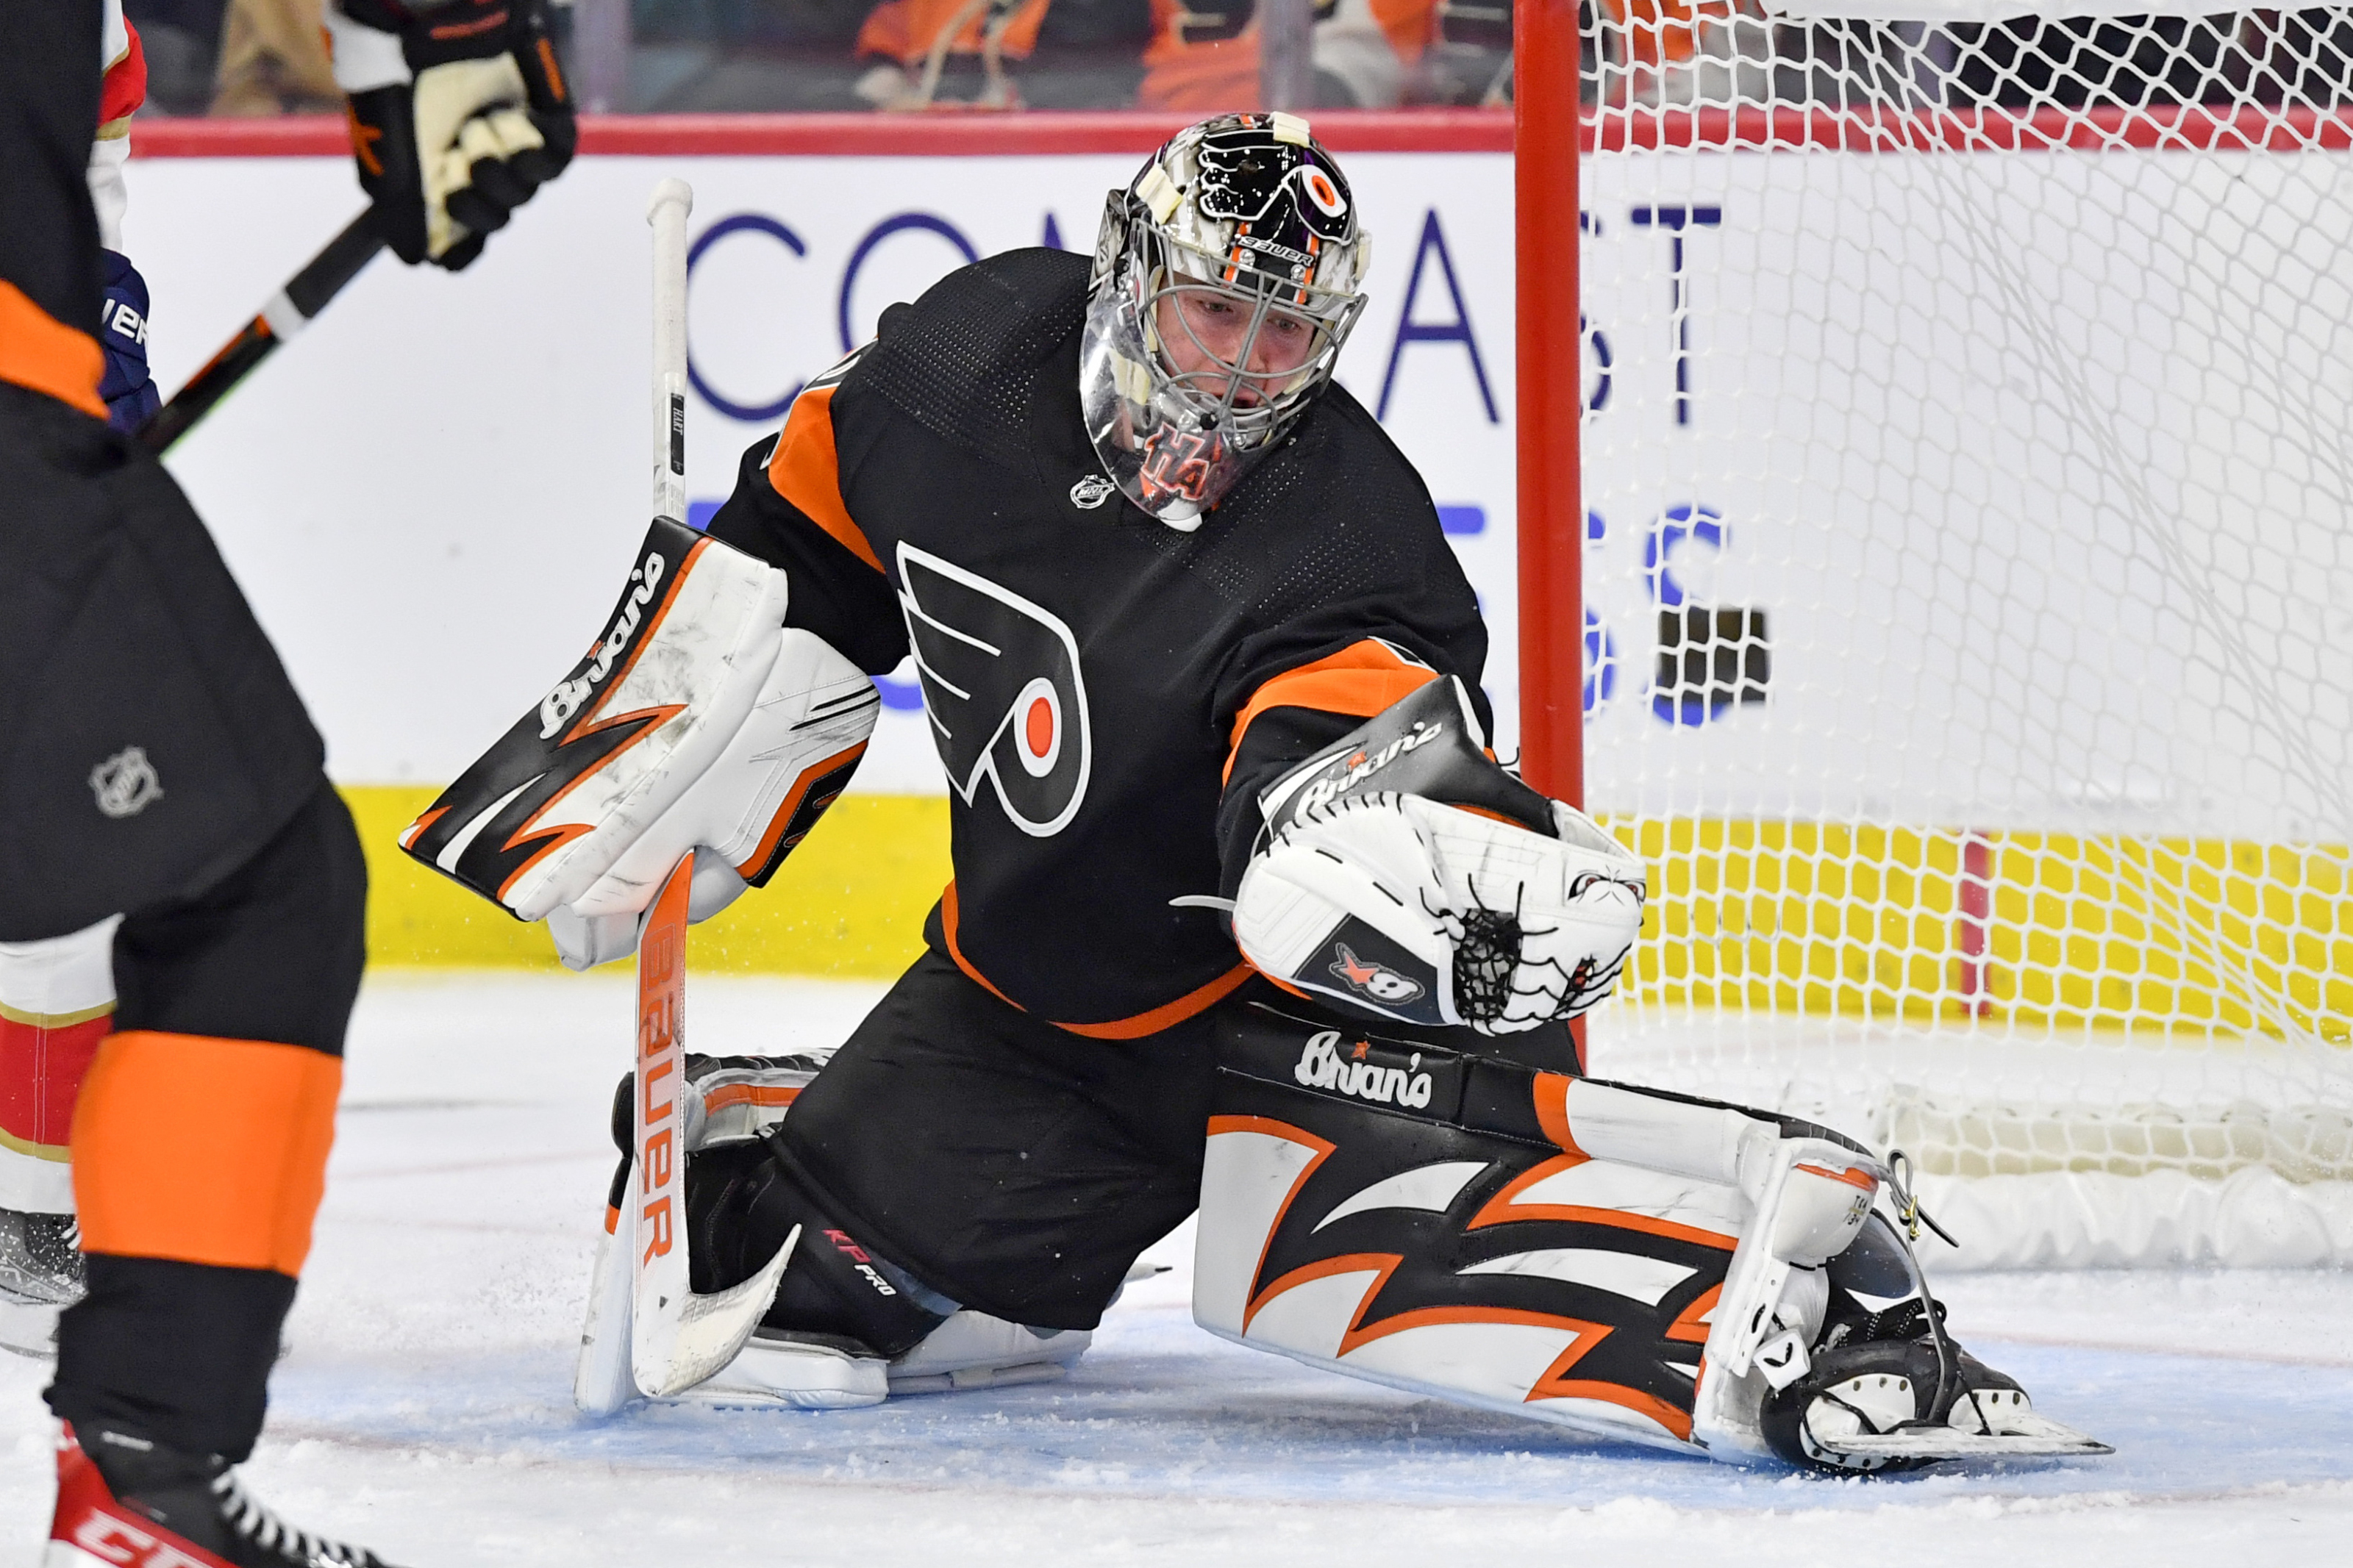 Flyers goalie Carter Hart takes part in full practice, says he's